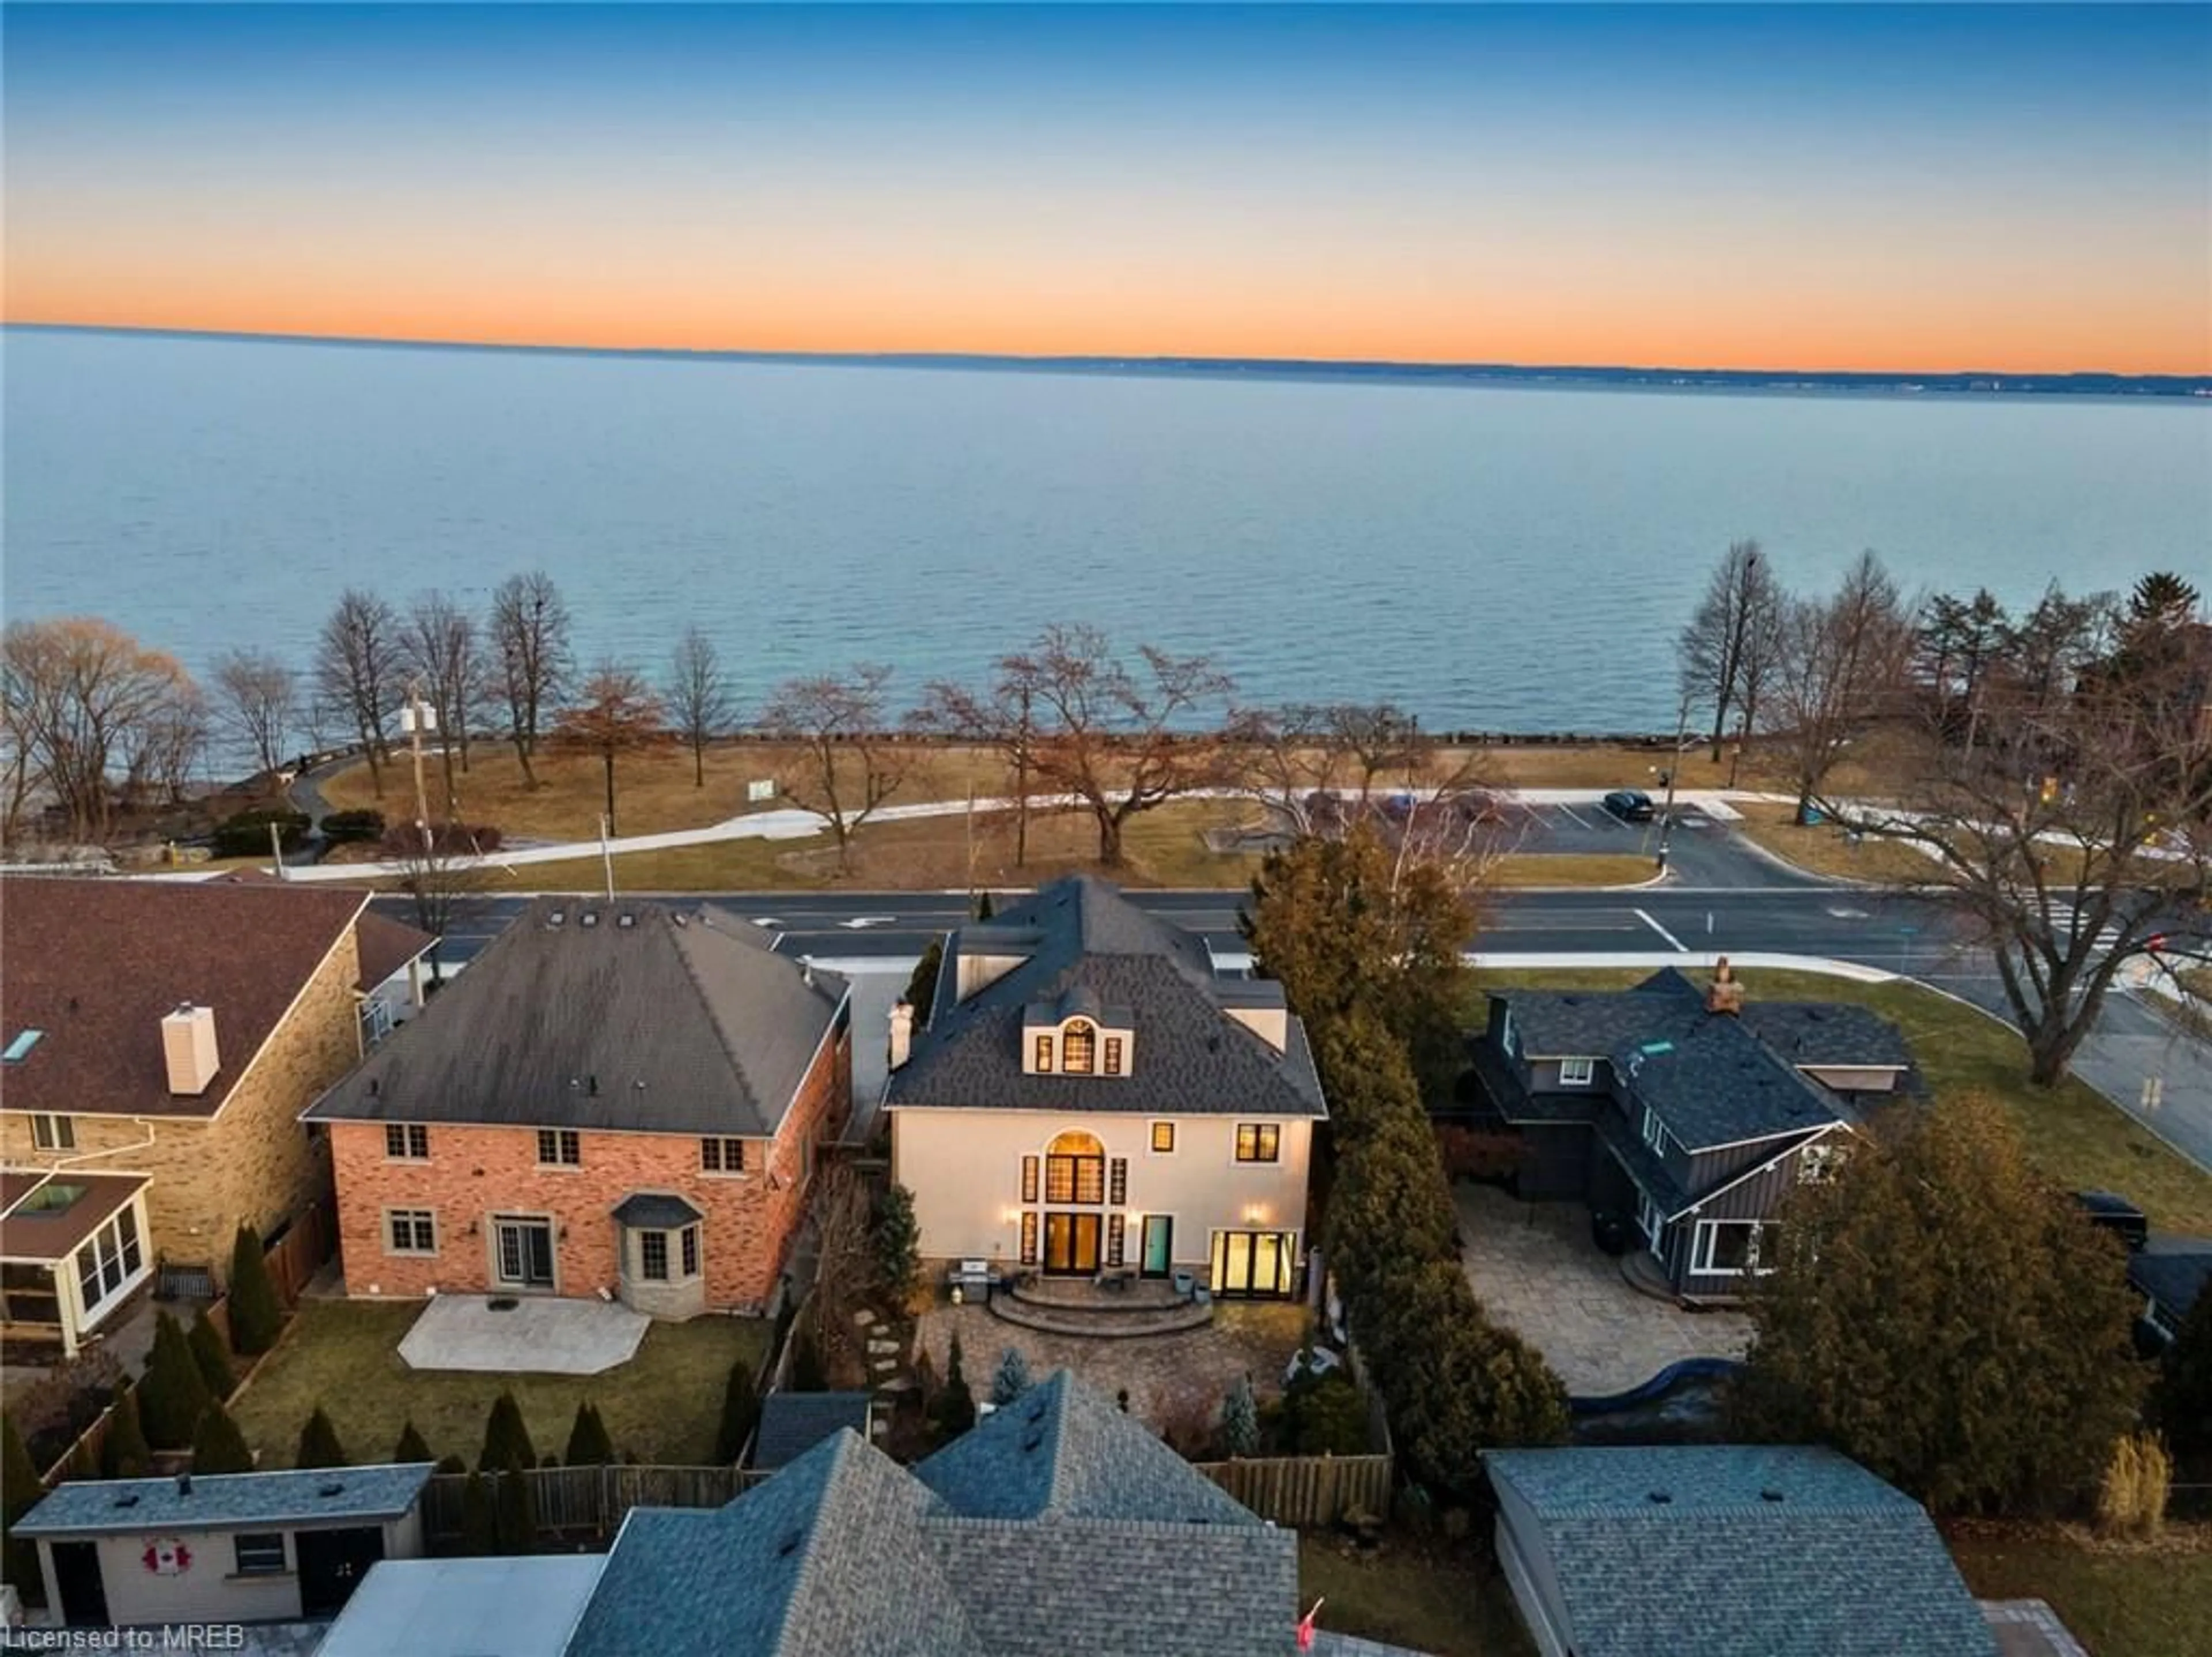 Lakeview for 3223 Lakeshore Rd, Burlington Ontario L7N 1A7